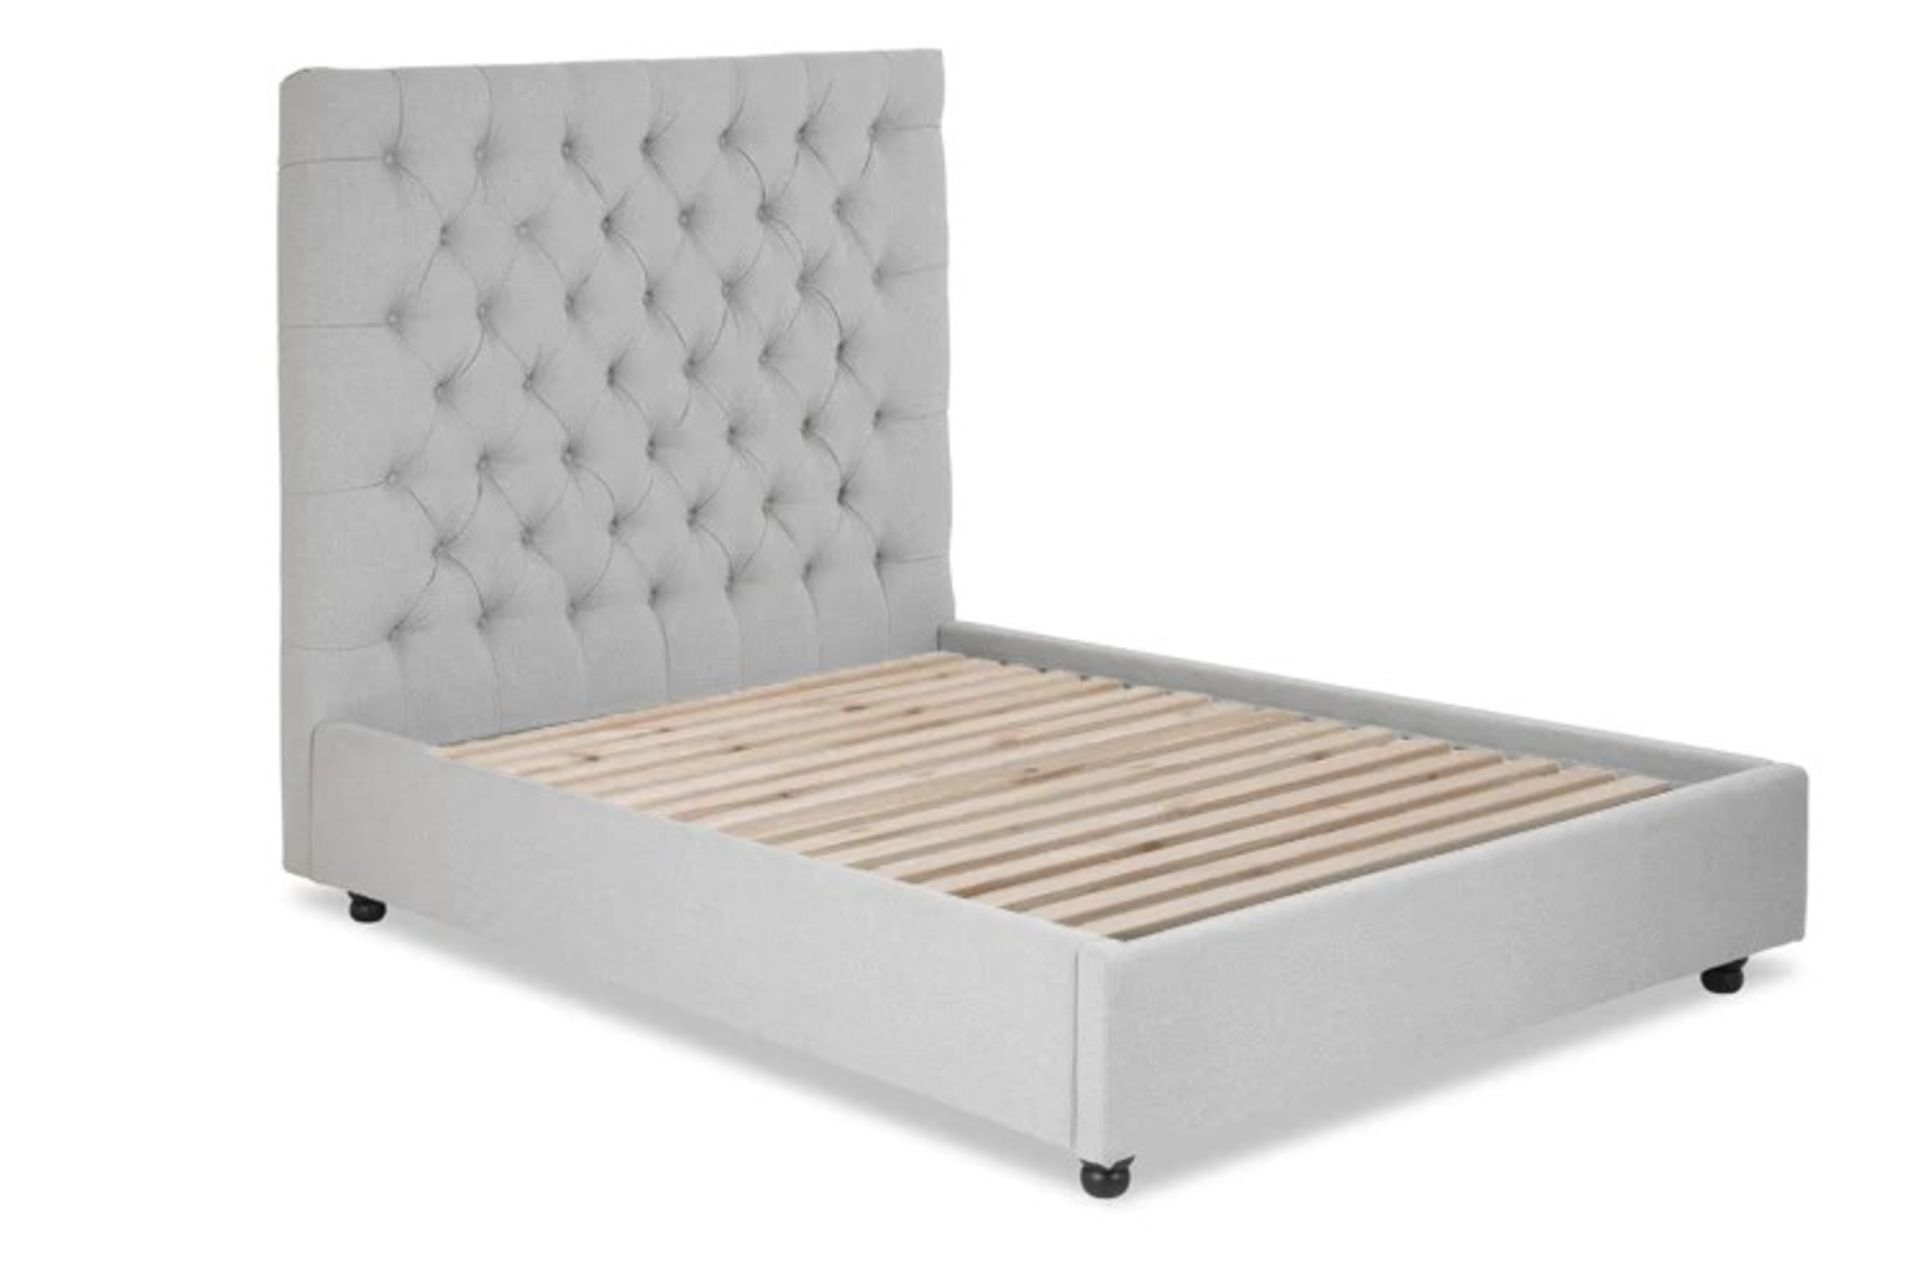 OVER £7000 OF YARK BED BASES & HEADBOARDS - Bulk Quantity of Customer Return Beds | Approx Value £7 - Image 8 of 8